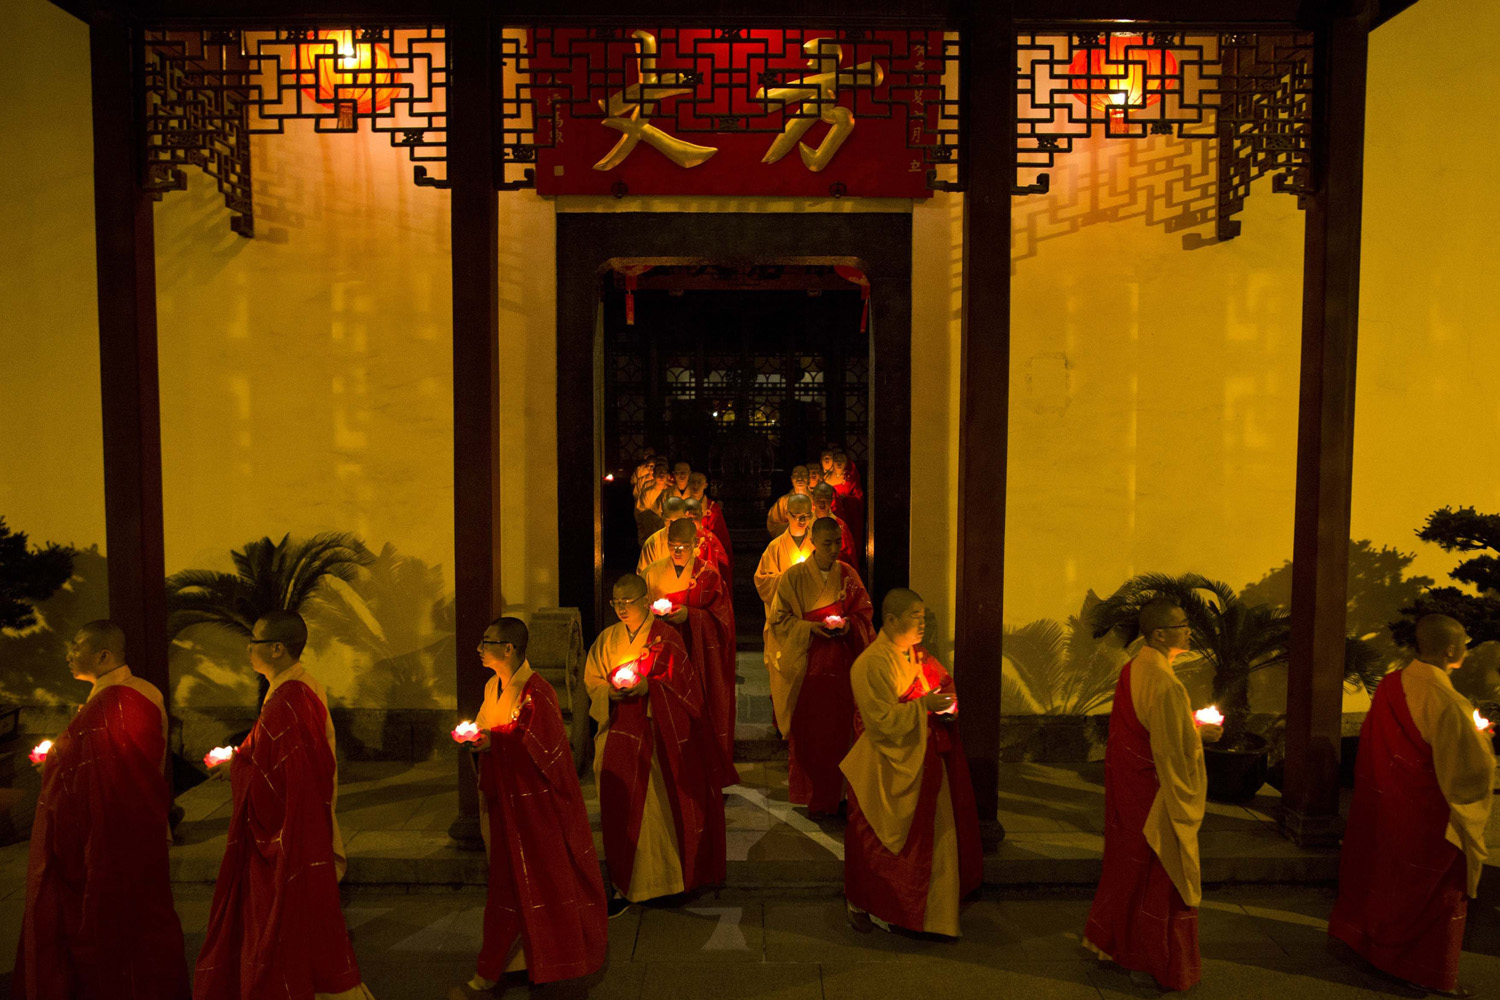 Monks hold candles as they pray during a ceremony to celebrate Buddha's birthday at the Yufo Temple in Shanghai